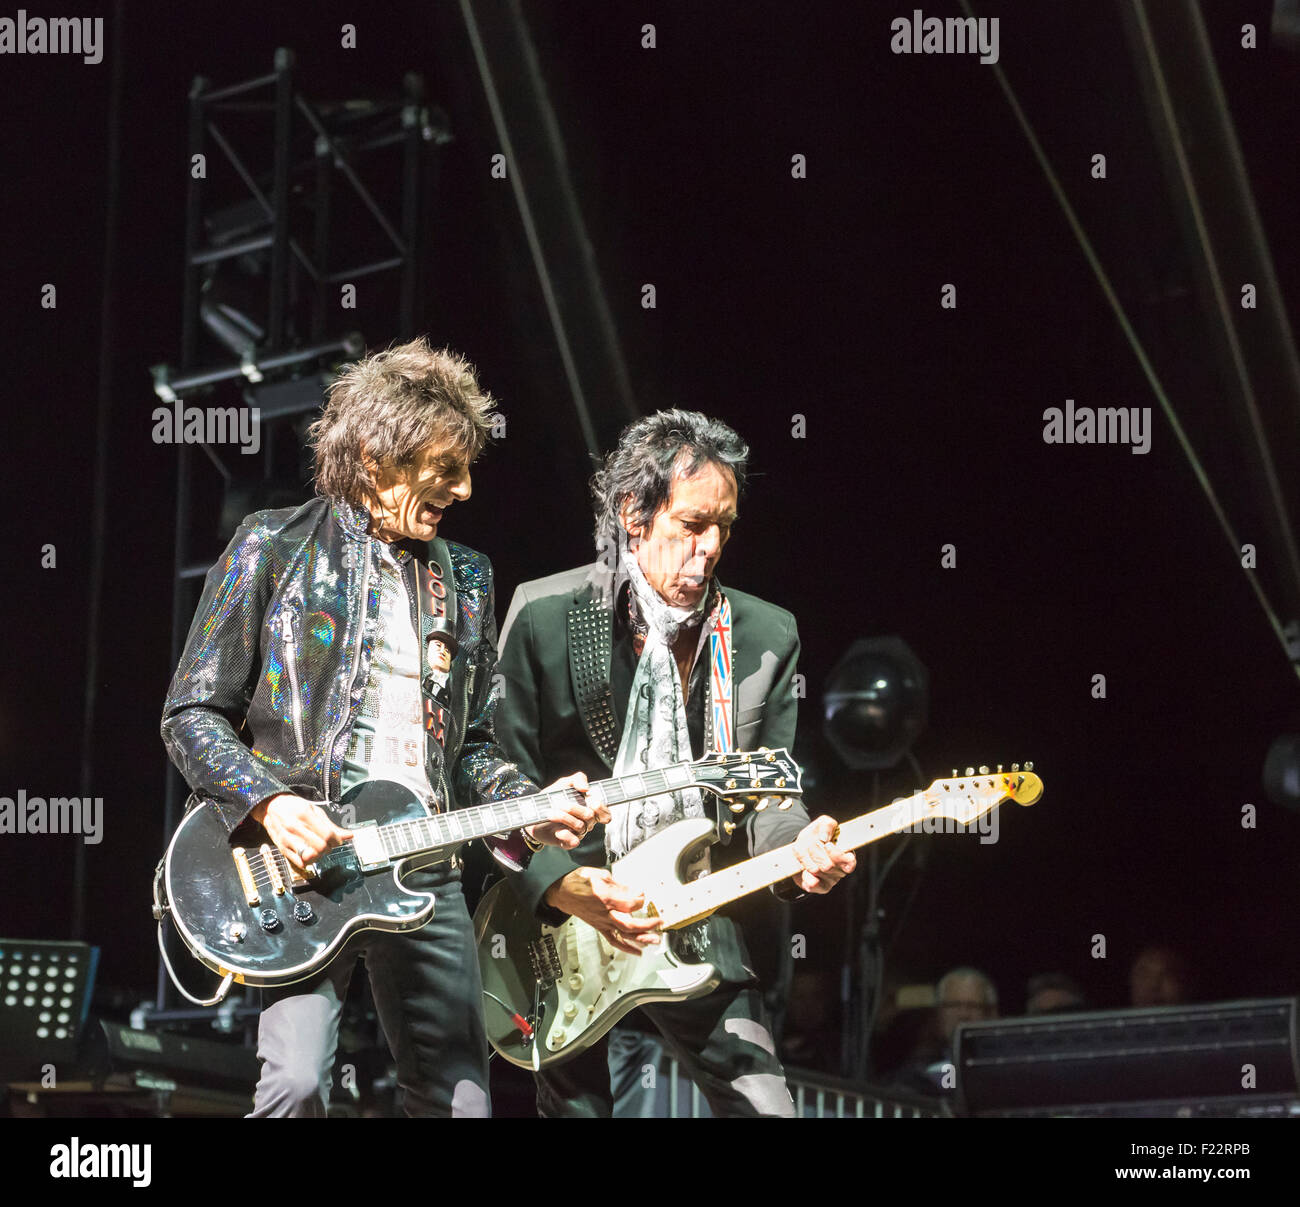 Pop stars Ronnie Wood and Robin le Mesurier jamming, playing guitar with The Faces reunited, performing in concert live on stage, Sept 2015 Stock Photo